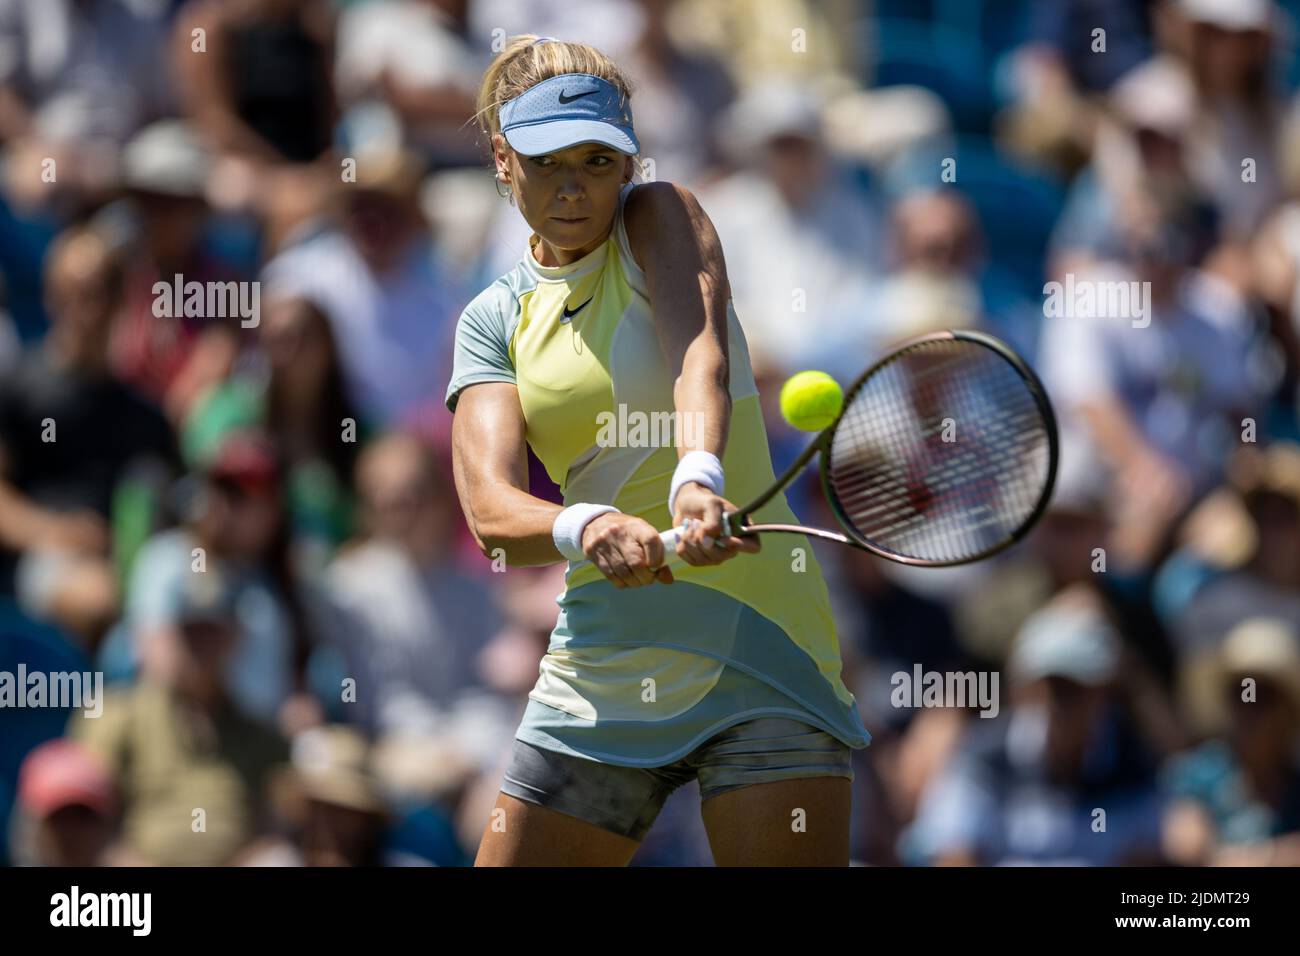 Eastbourne, England, 22 June, 2022. Katie Boulter playing two handed  forehand during the game vs Petra Kvitova of Czech Republic on Centre Court  at the Rothesay International. Credit: Jane Stokes/Alamy Live News